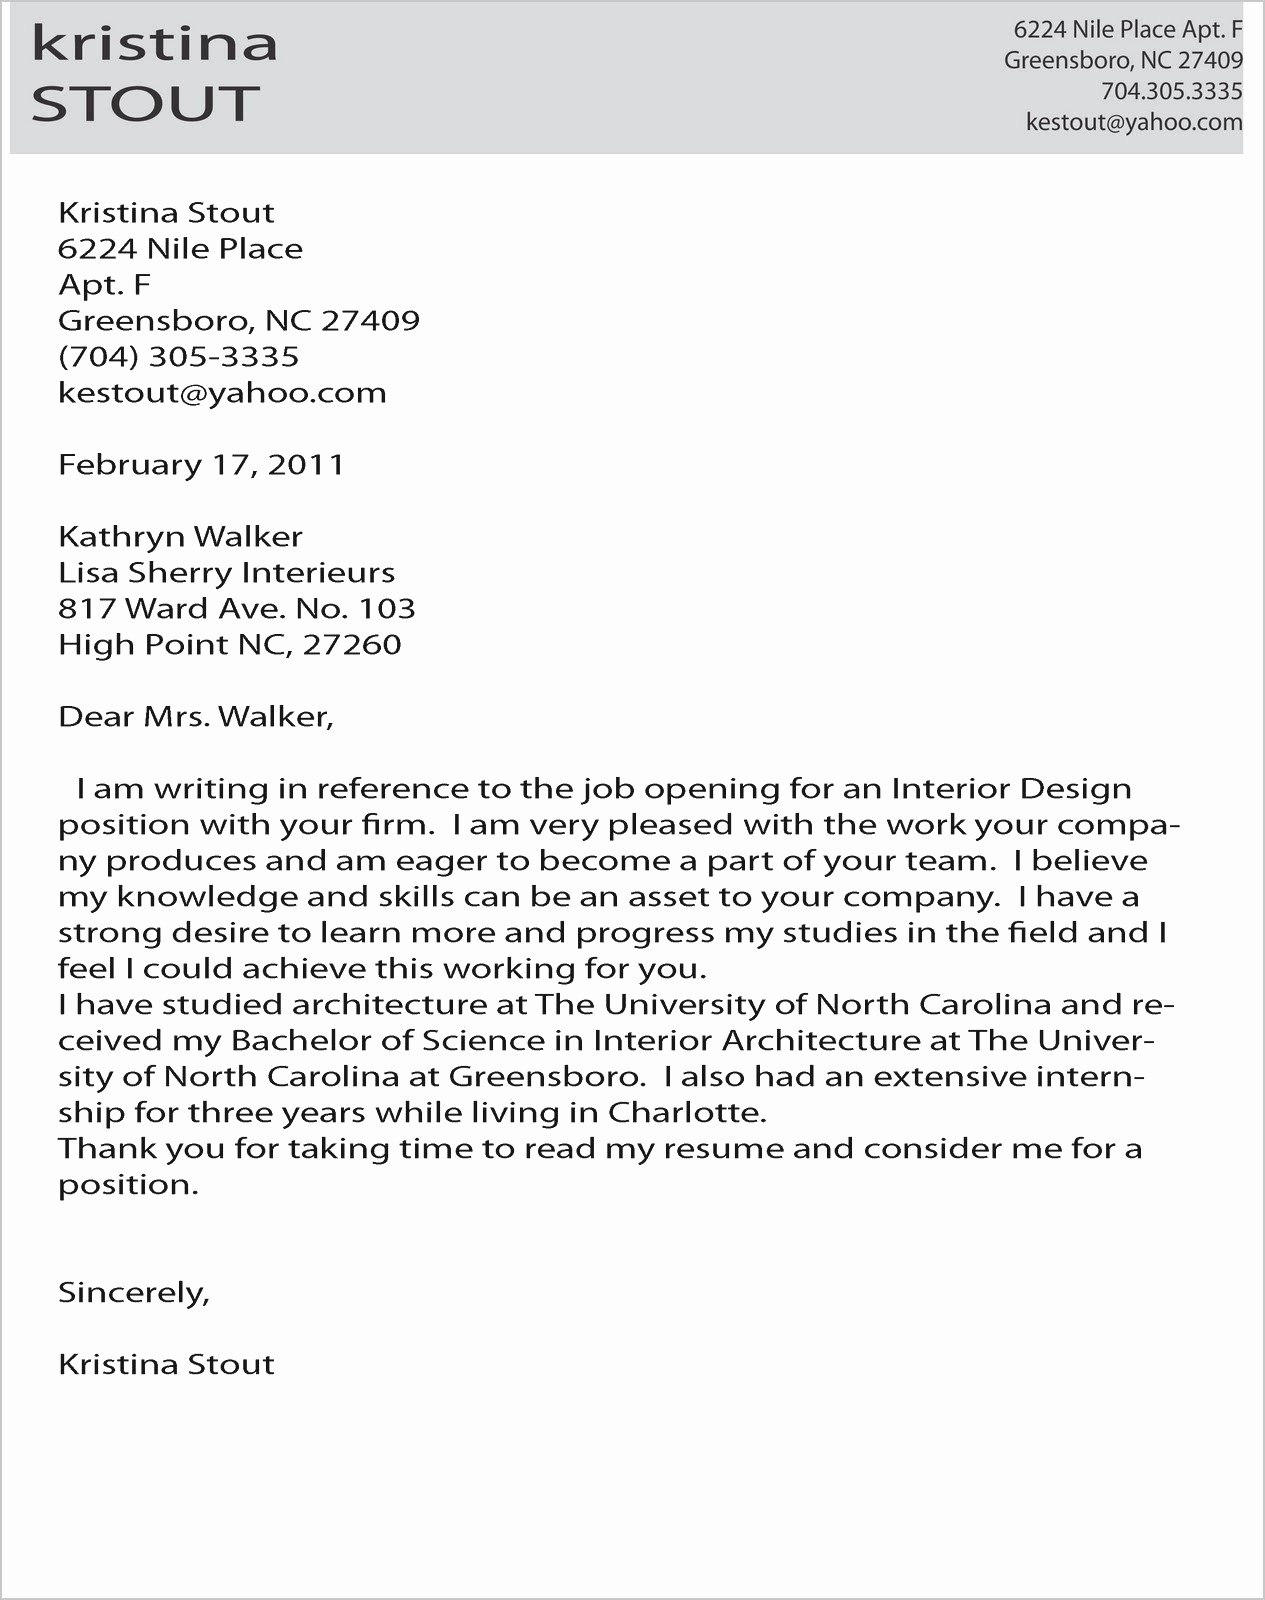 Welcome Letter Email Template - Resume Introduction Letter Lovely 20 Need Help Making A Resume